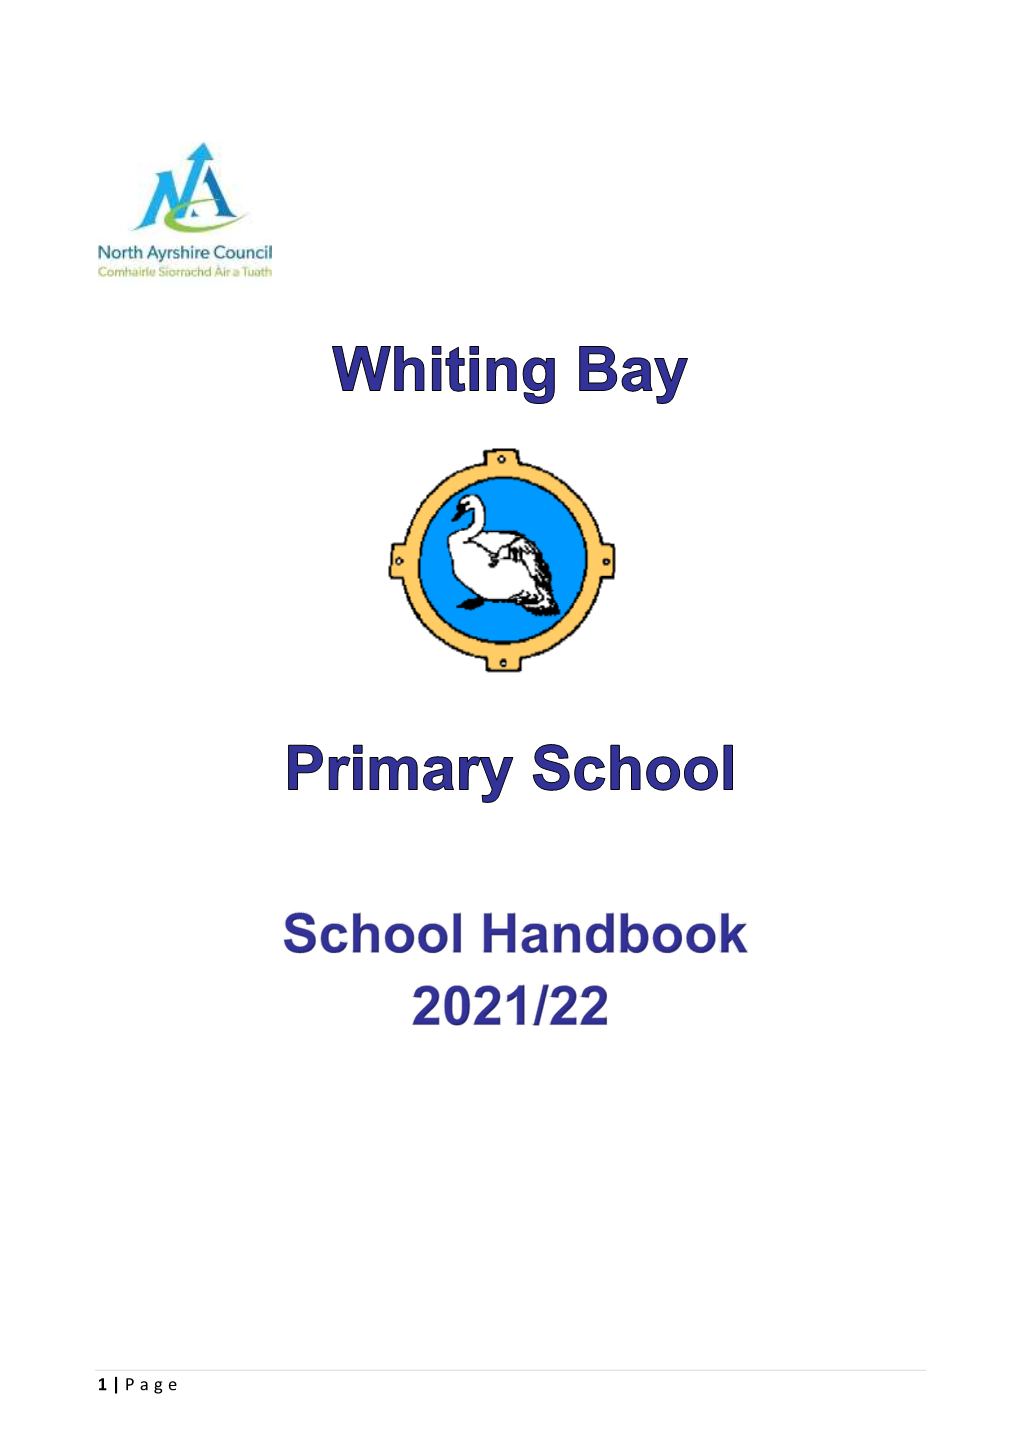 Whiting Bay Primary School Aims, Values, Ethos